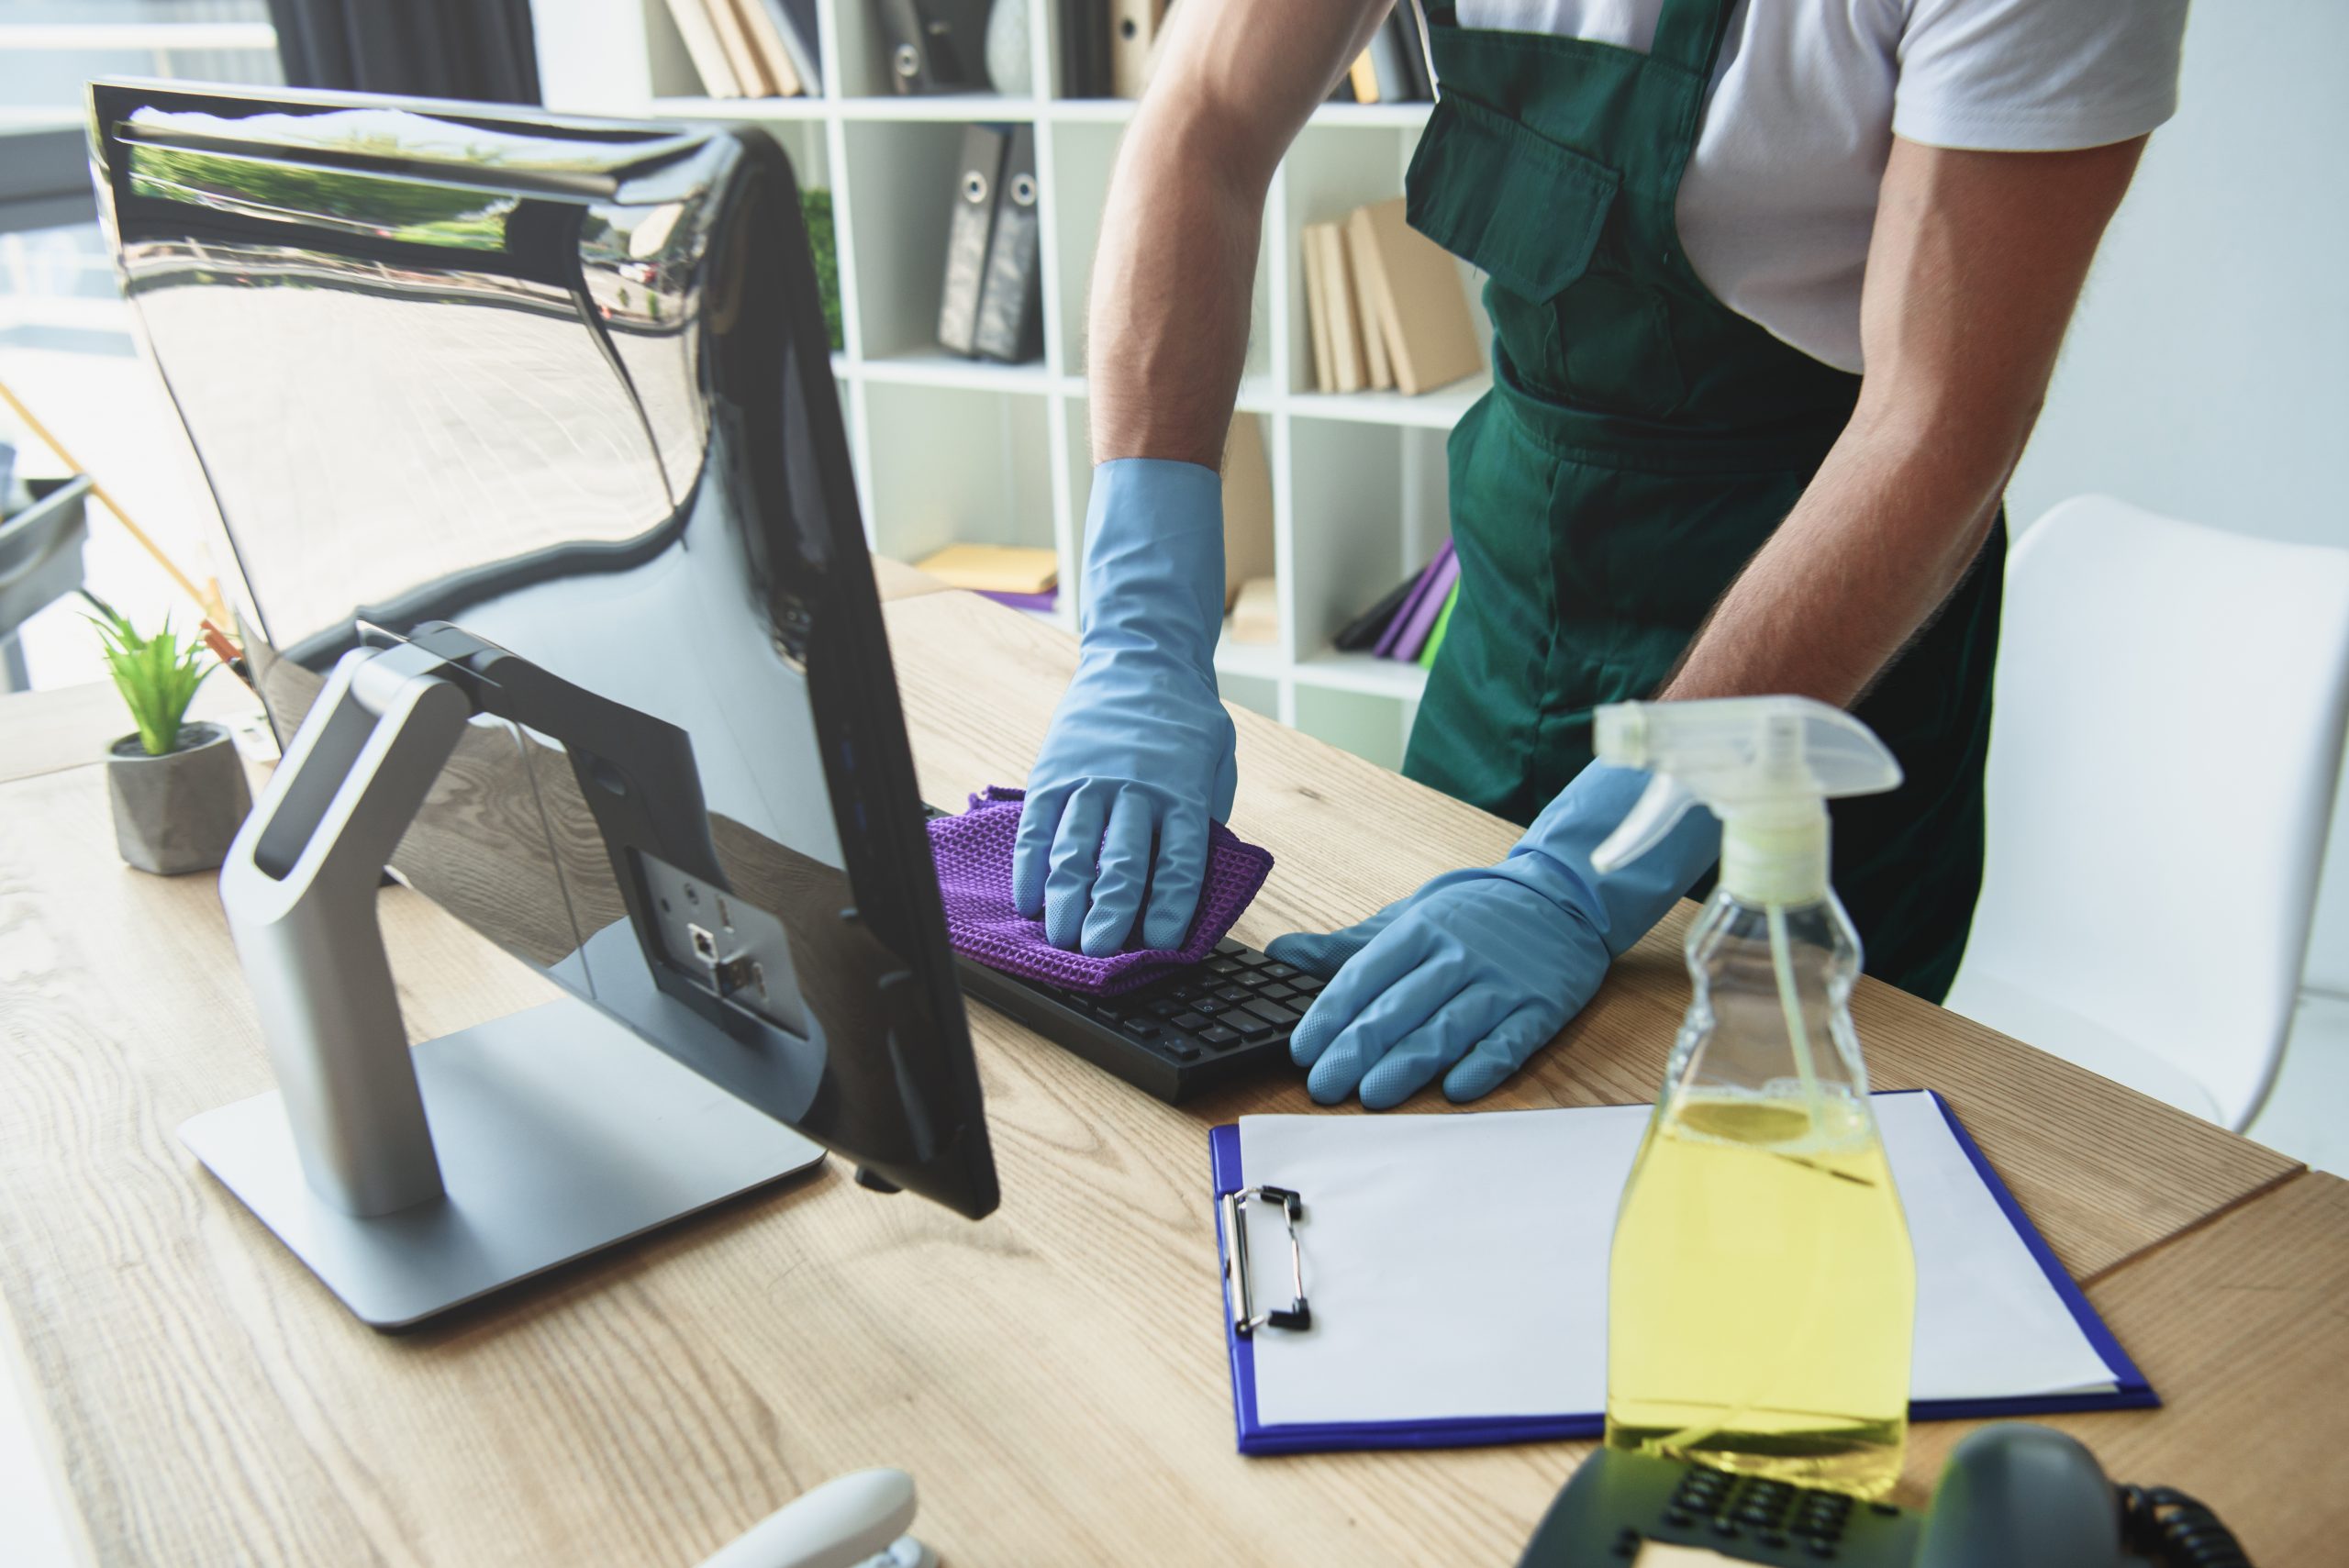 How to Effectively Clean & Disinfect Your Workplace